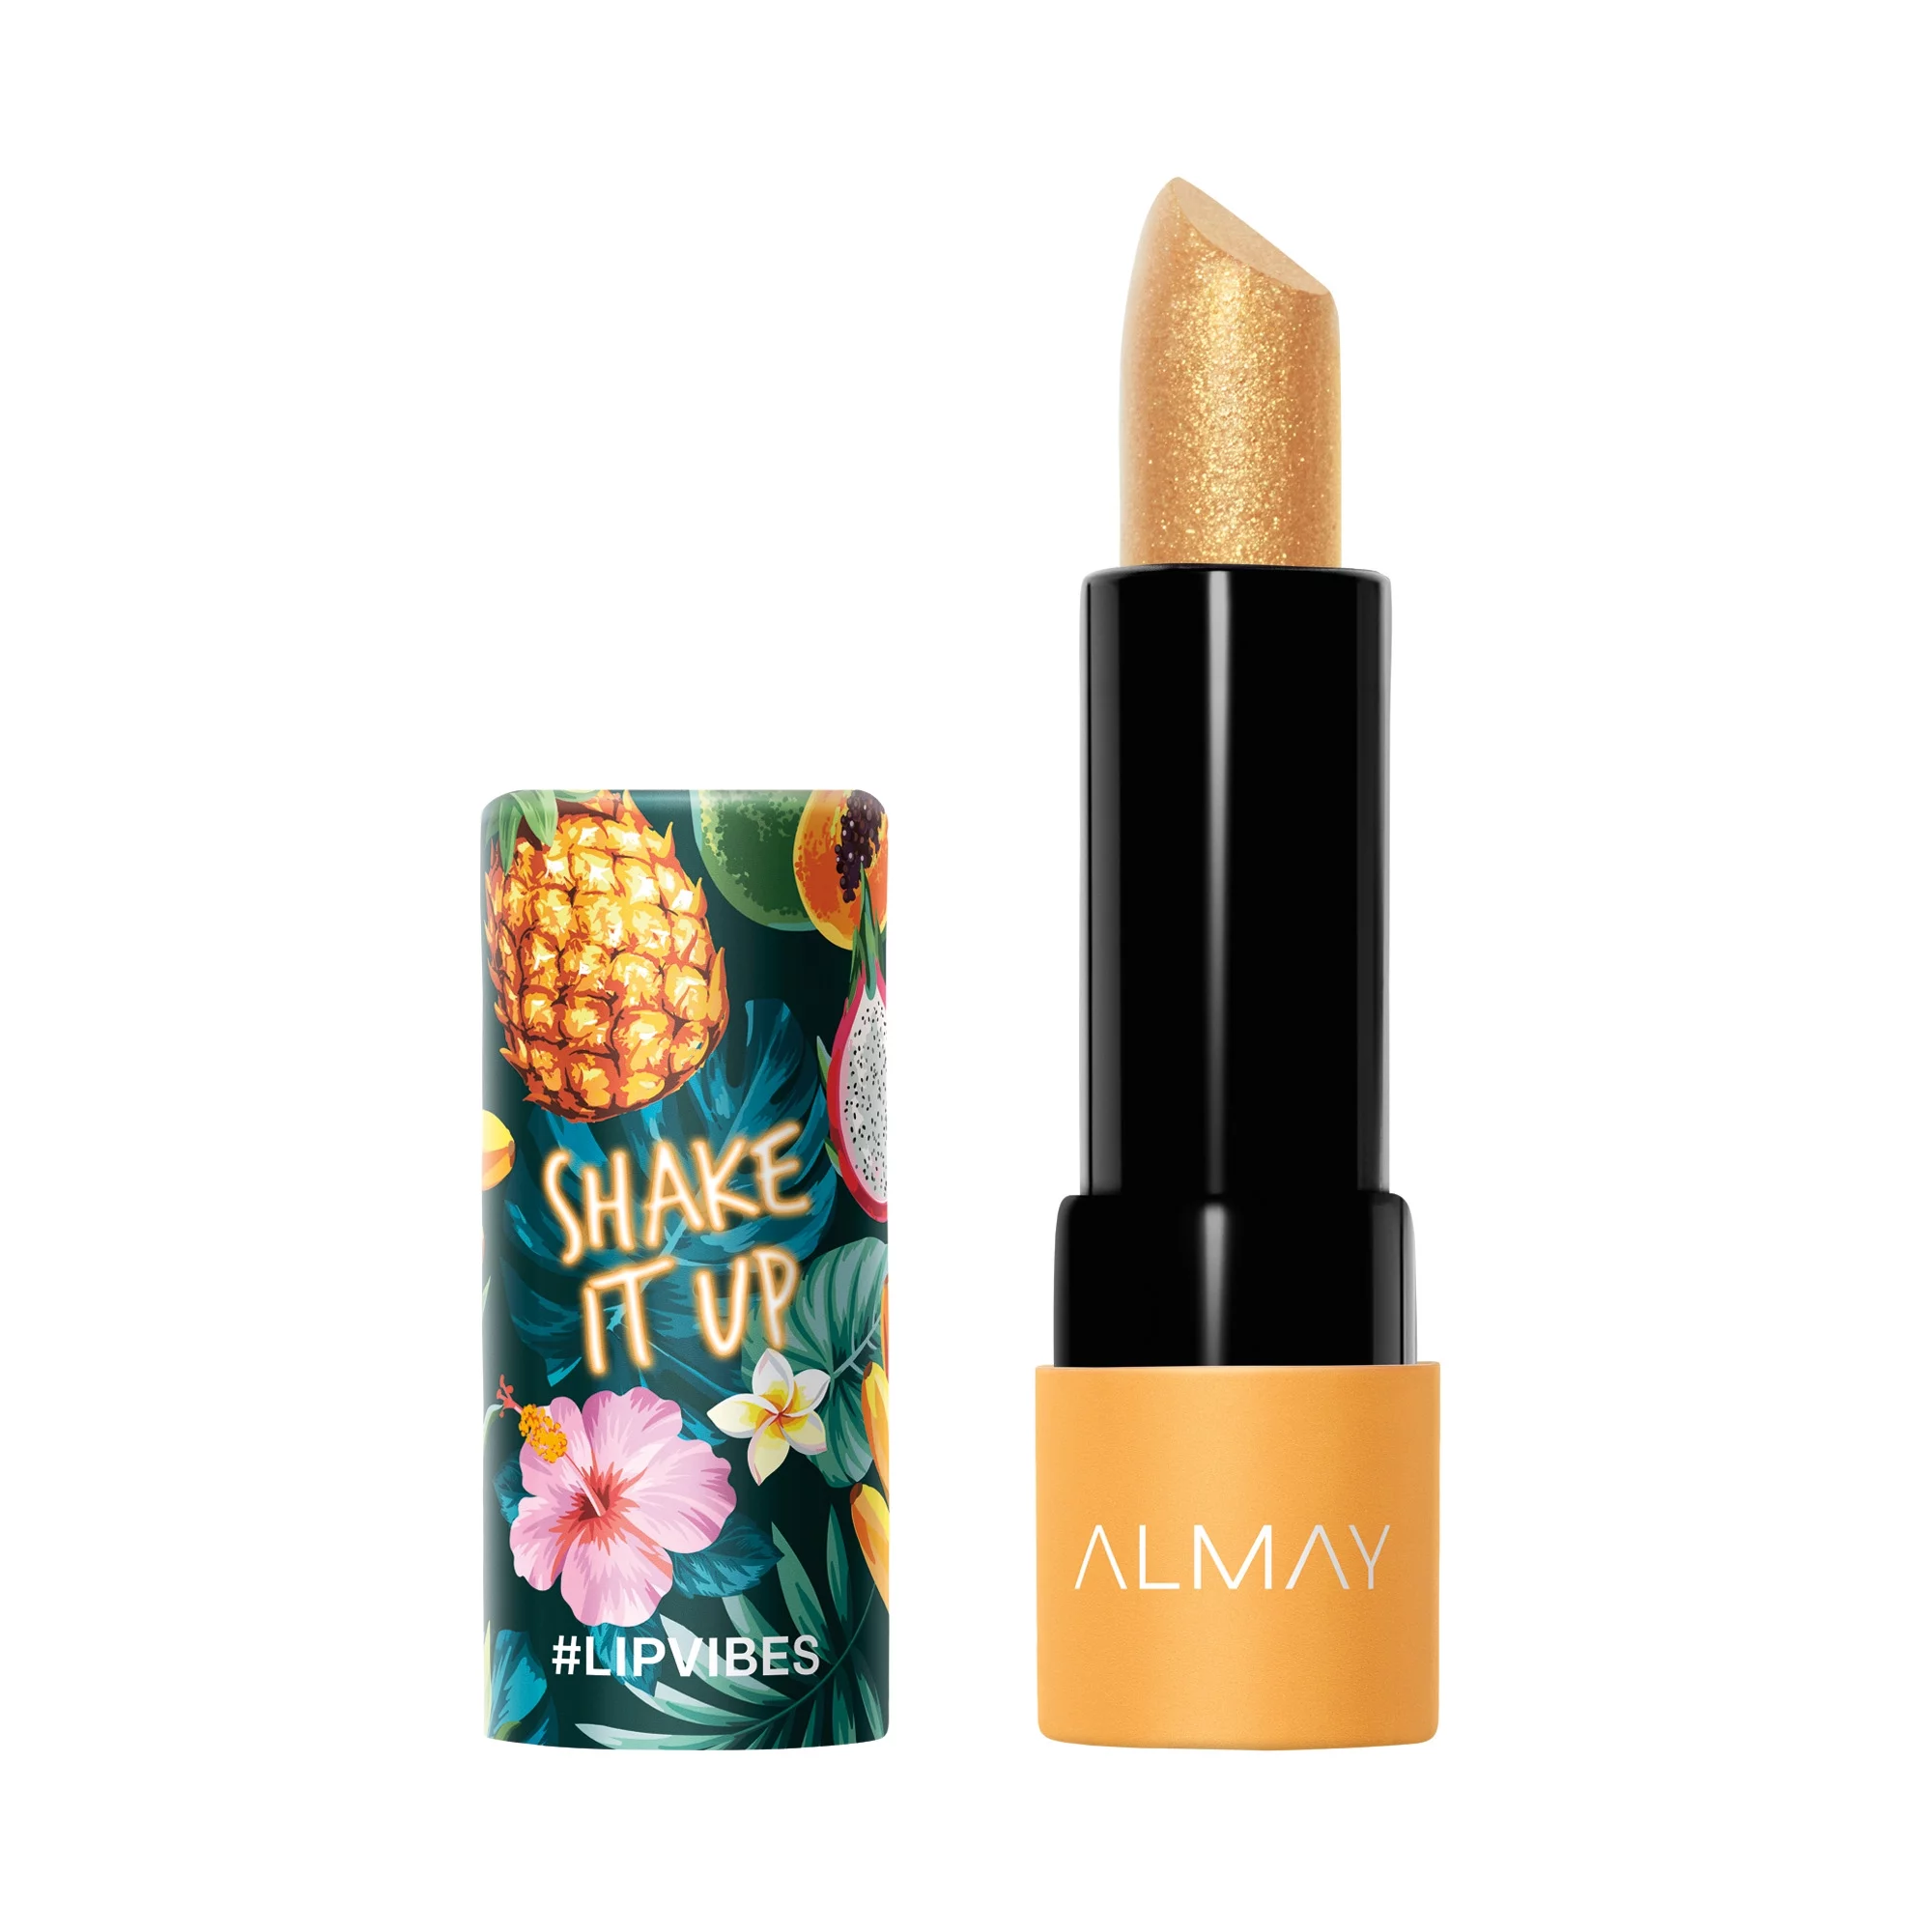 Almay Lip Vibes, Hypoallergenic, Cruelty Free, Oil Free, Fragrance Free, Ophthalmologist Tested Lipstick, with Shea Butter and Vitamins E and C, Shake It Up